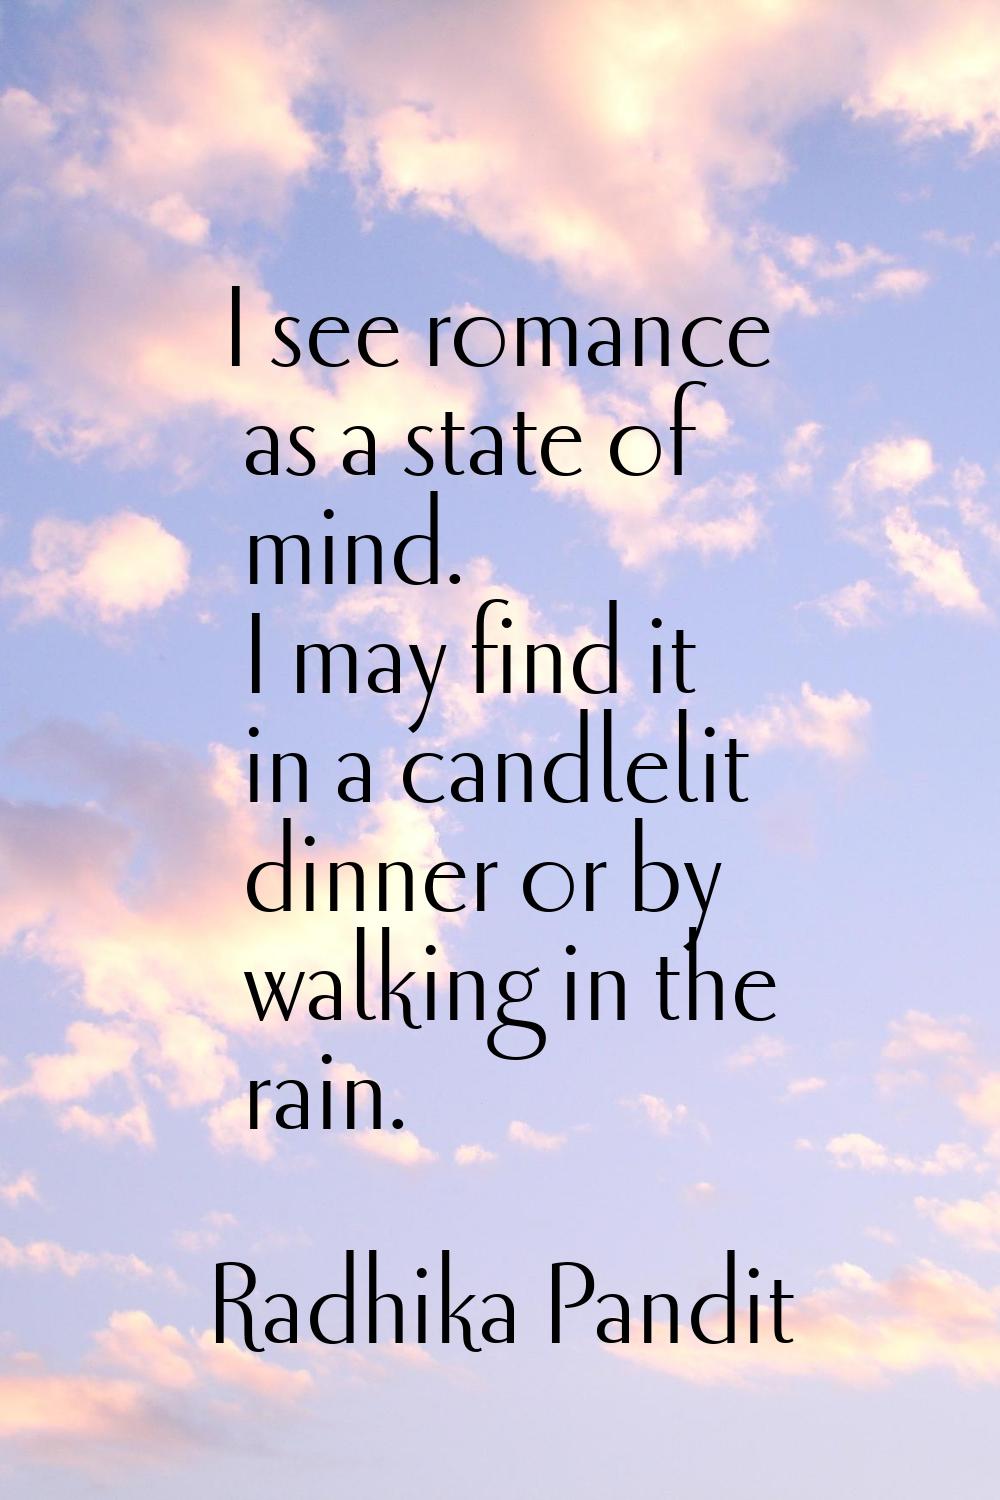 I see romance as a state of mind. I may find it in a candlelit dinner or by walking in the rain.